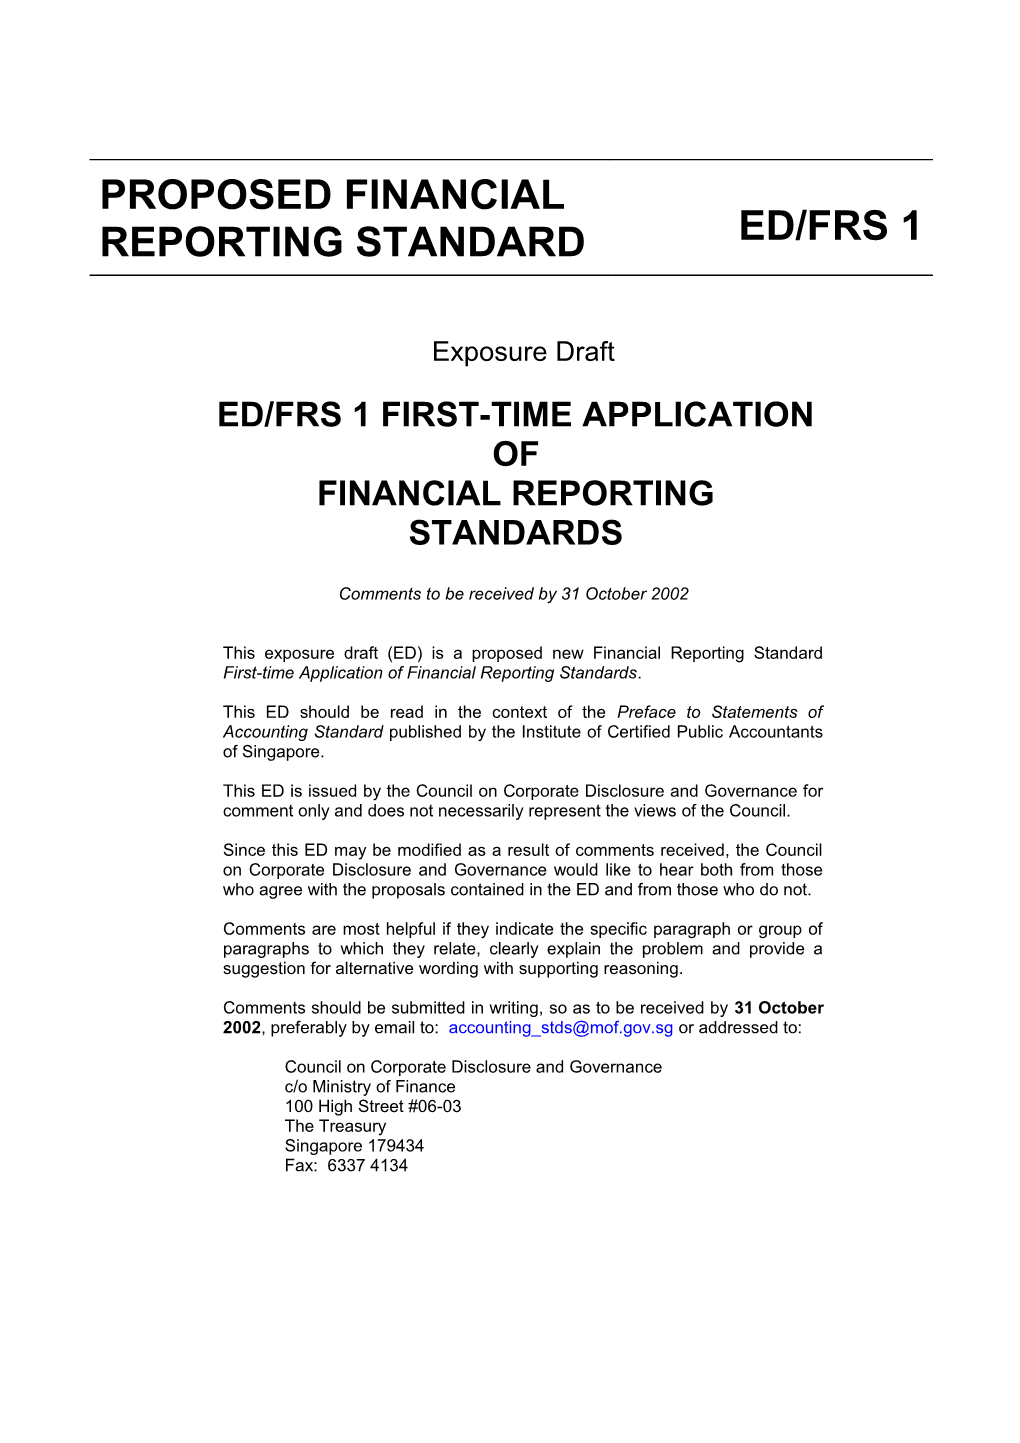 Ed/Frs 1 First-Time Application